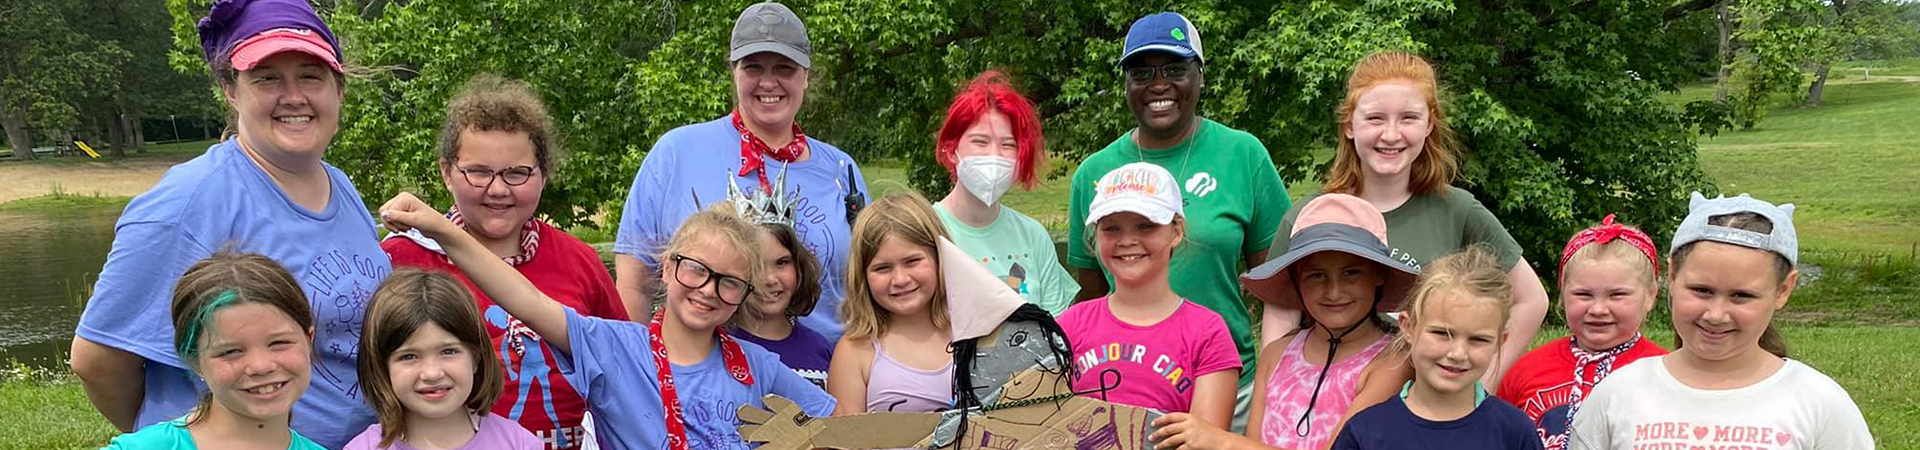  loretta graham with girl scouts at camp 